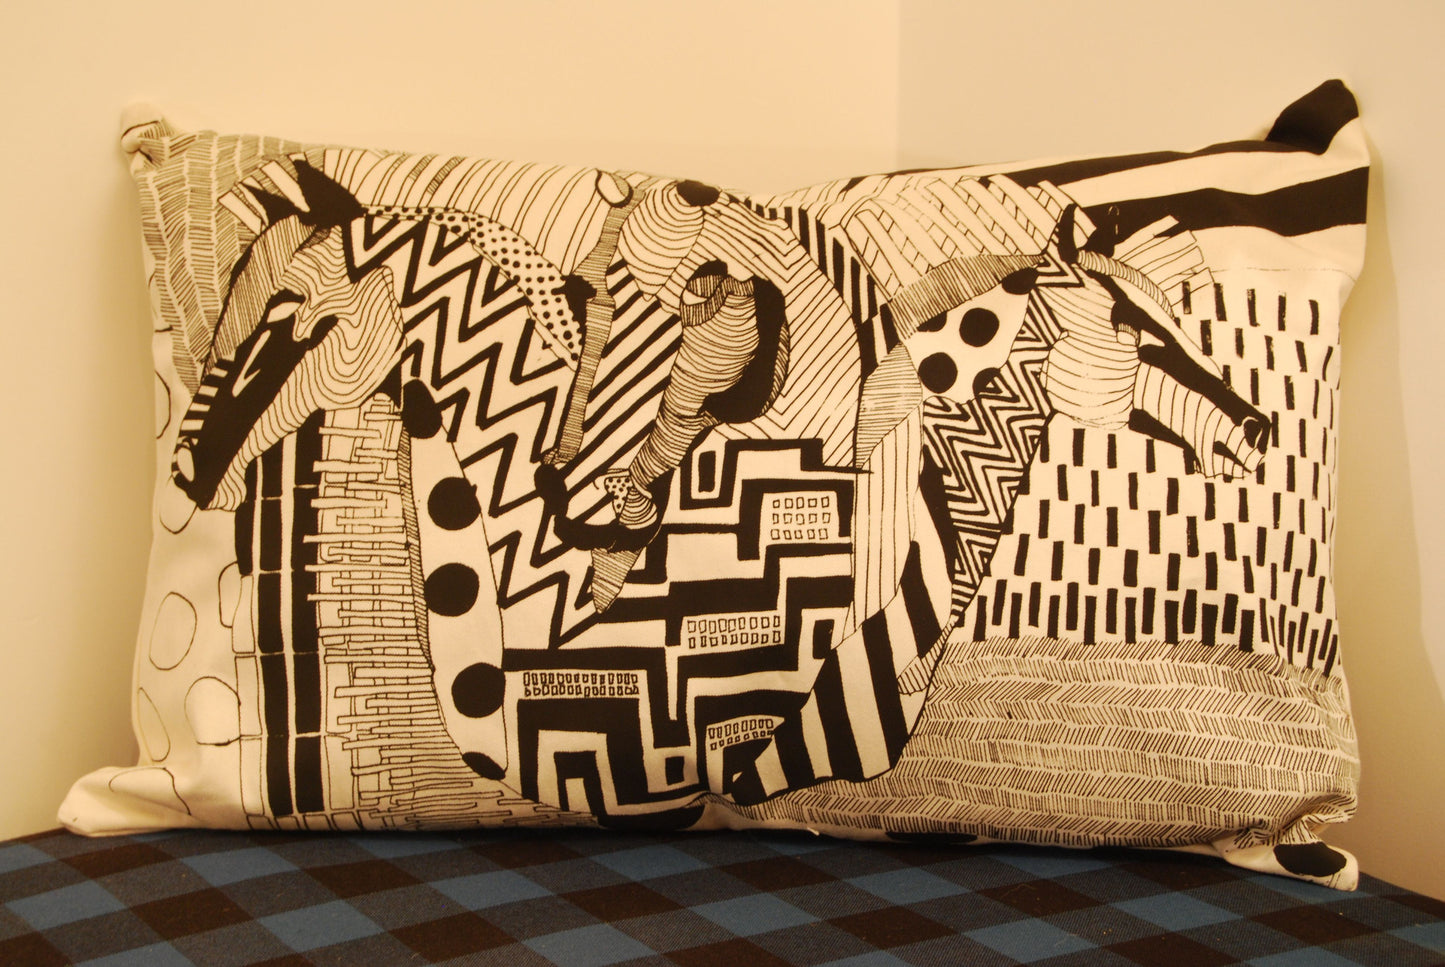 Cushions by Sager Forsberg